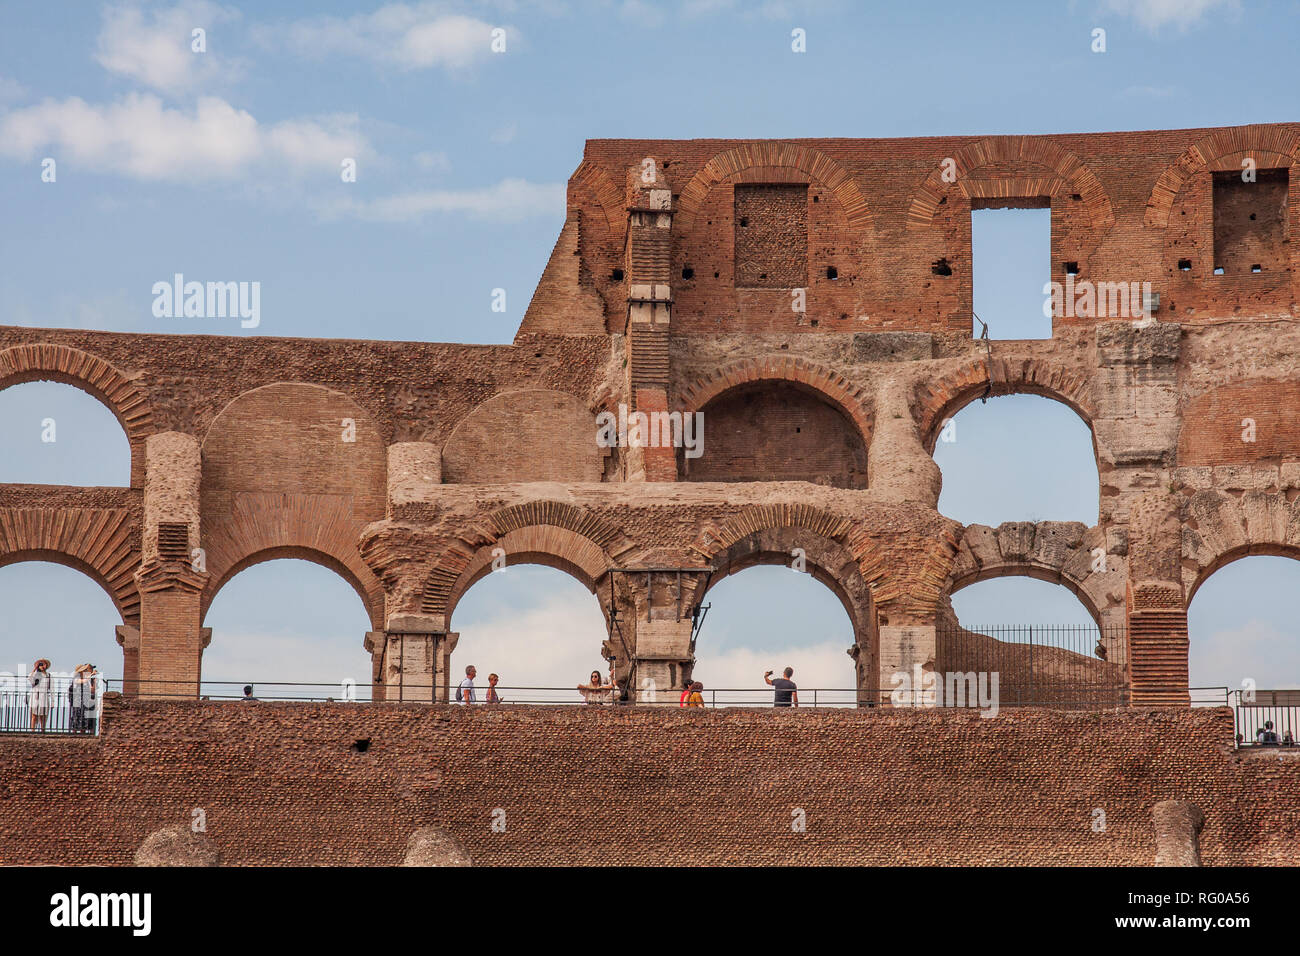 Interior section of Colosseum Rome Stock Photo